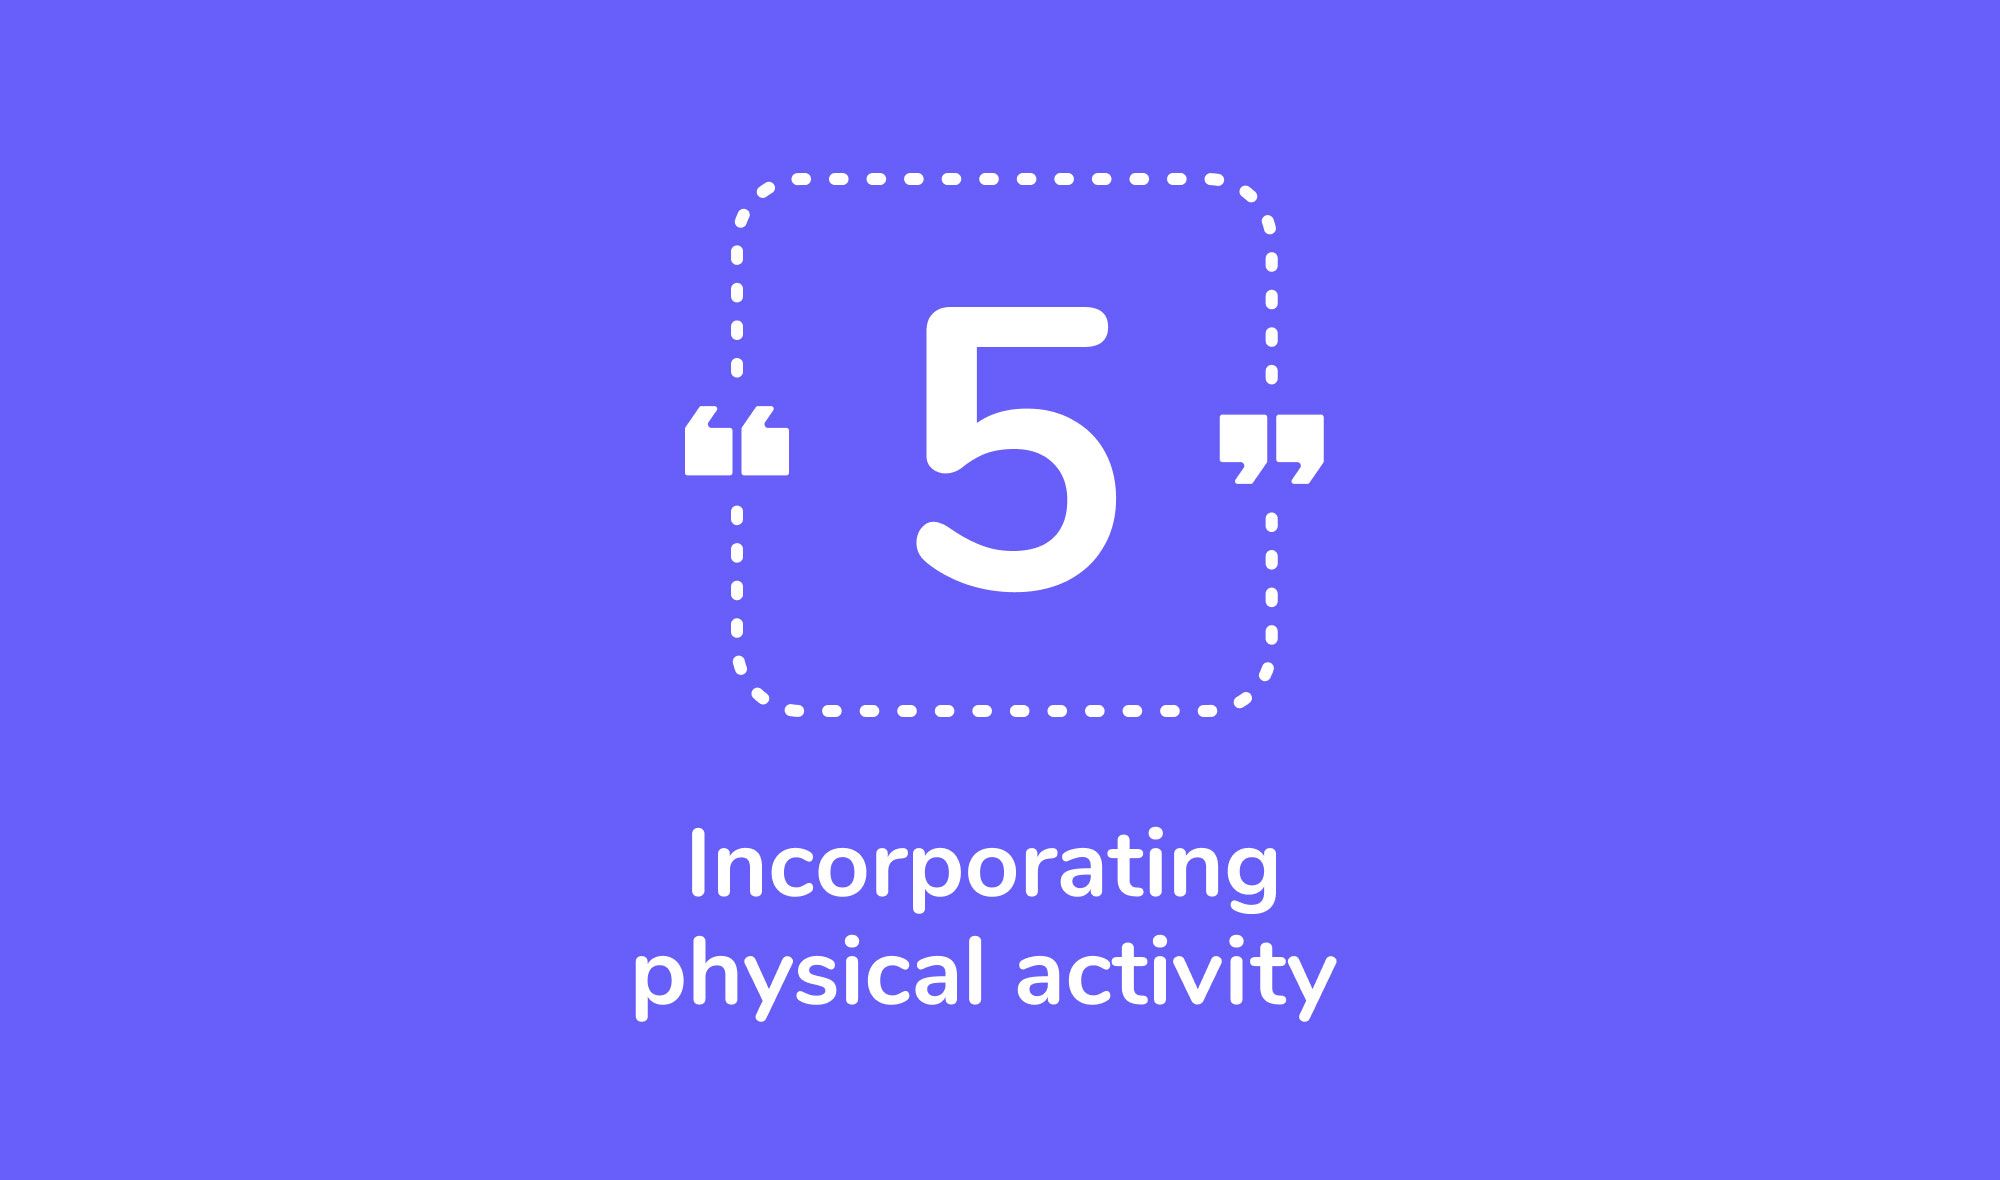 Flow state training - Incorporating physical activity